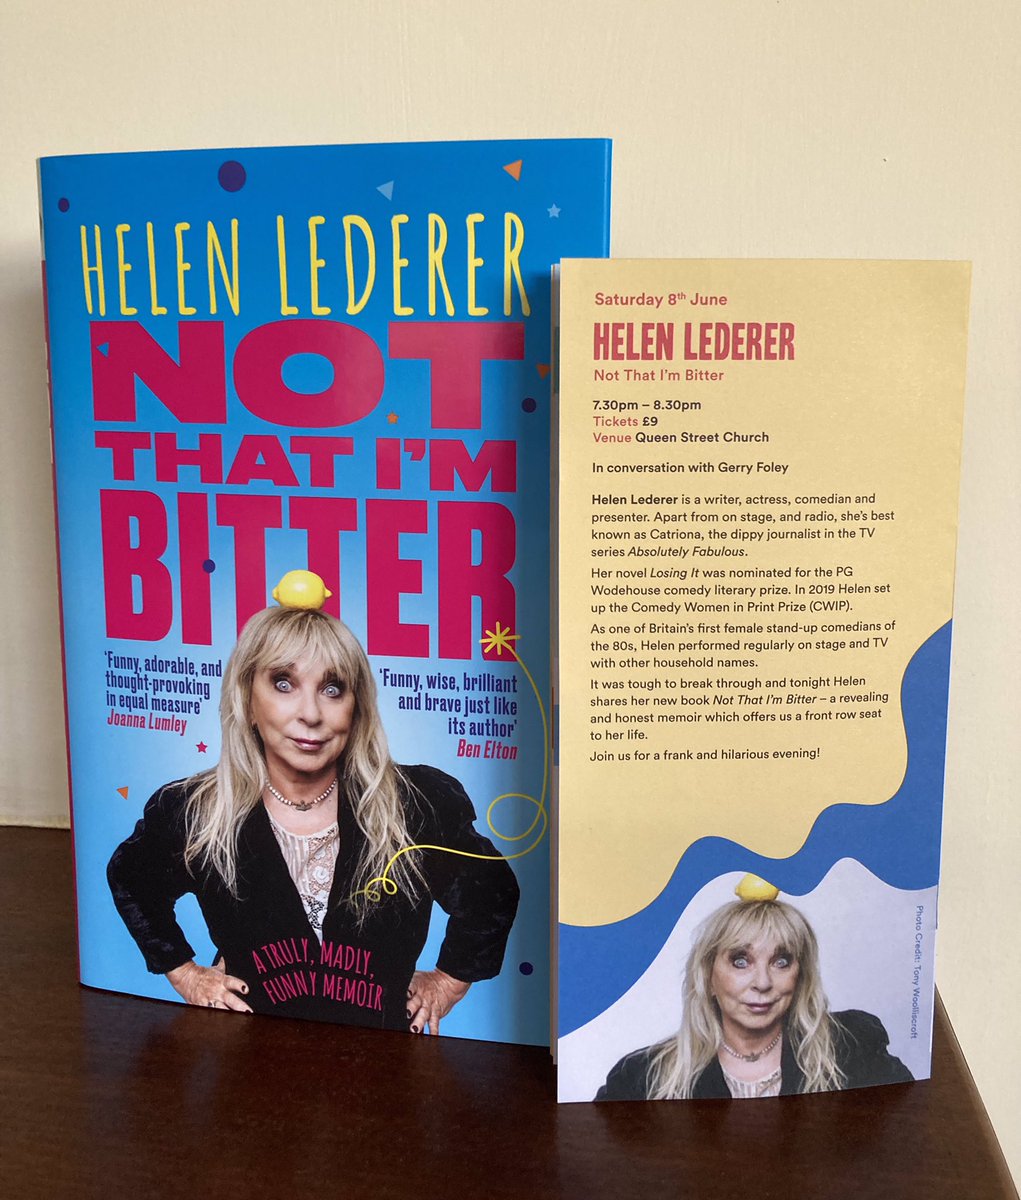 #Scarborough preparing a BIG welcome for top comedian @HelenLederer in conversation with @GerryFoleyTV Sat 8 June, 7.30pm. Hurry for tickets here- ticketsource.co.uk/ymcascarboroug… @ScarboroughWeb @scifiscarbs @TheScarboroNews #memoirs #comedy #funny